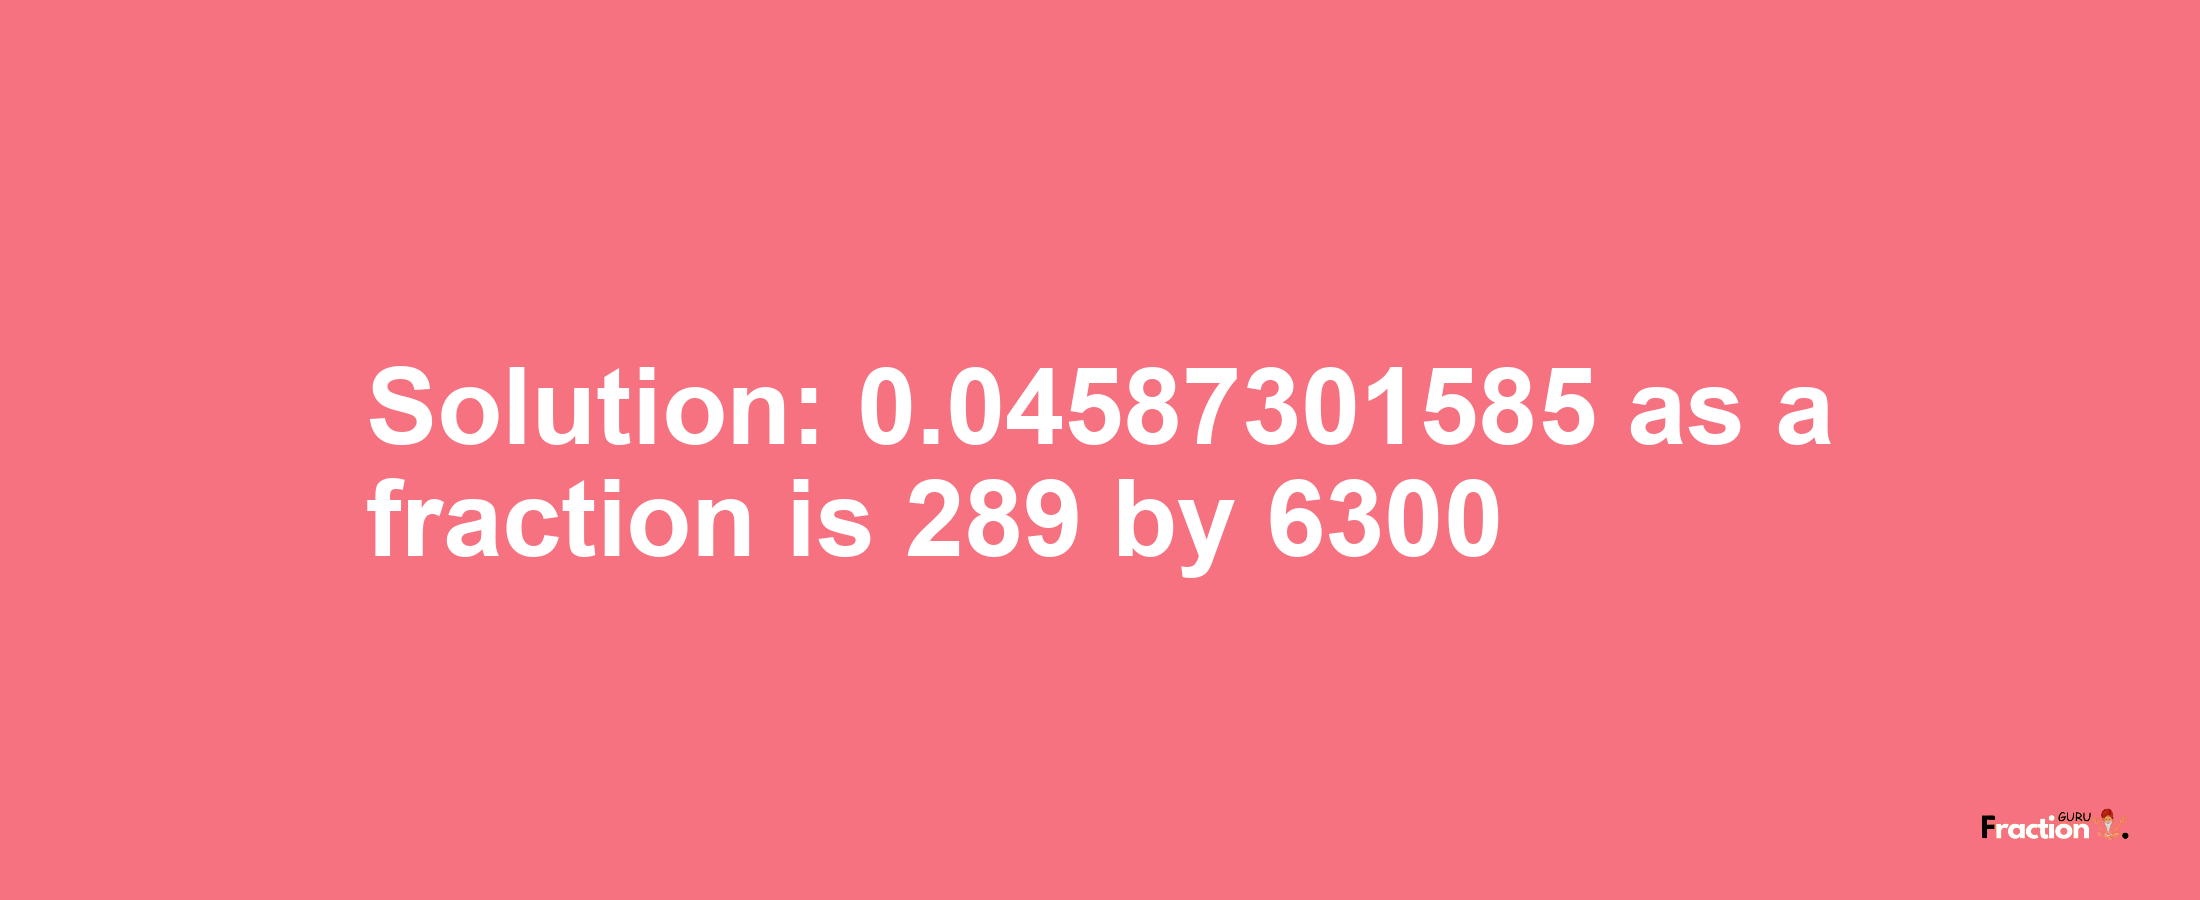 Solution:0.04587301585 as a fraction is 289/6300